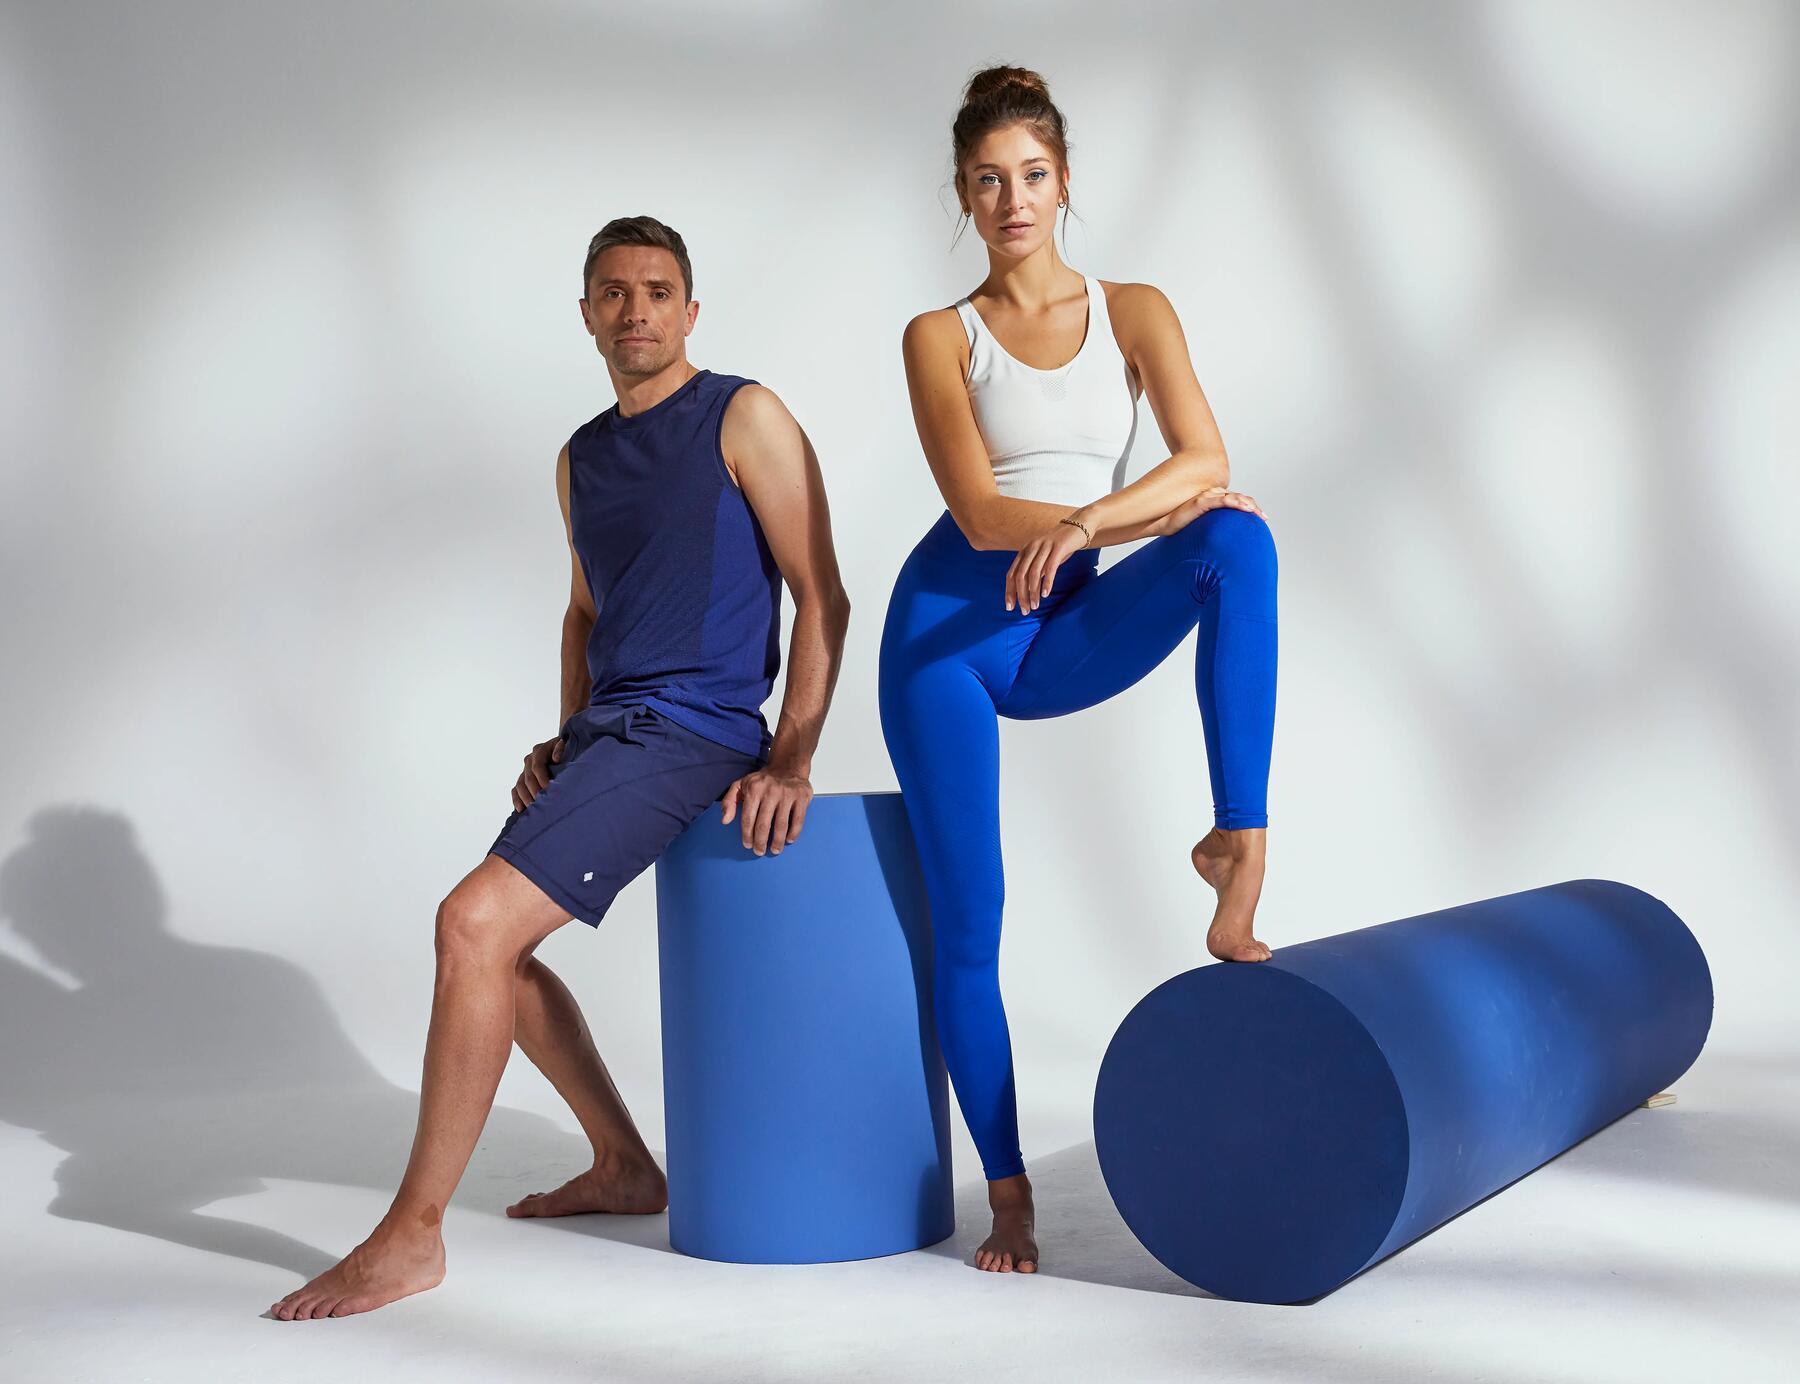 A GUY and a woman posing showing some Kimjaly blue outfit